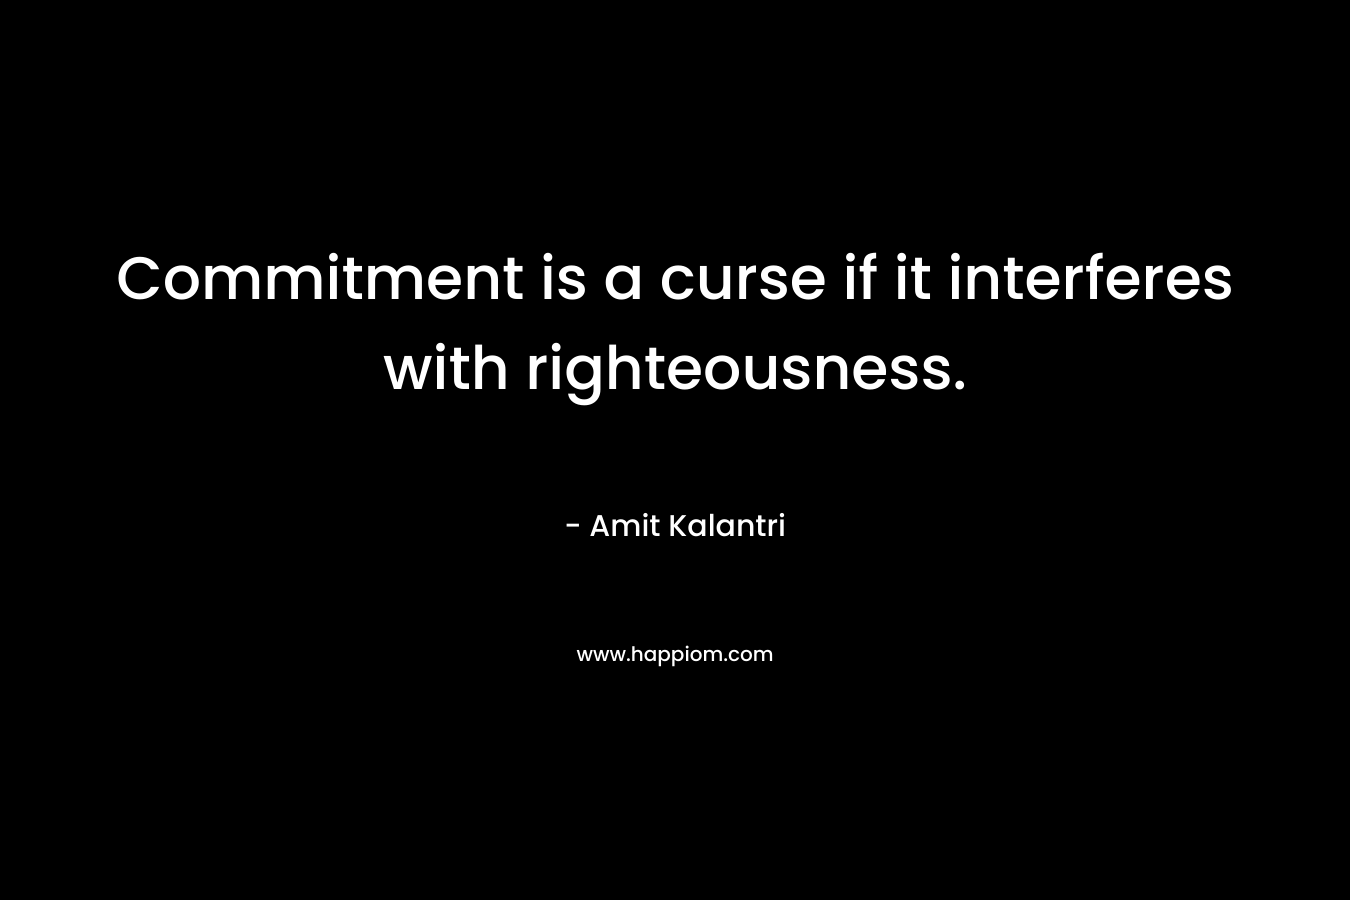 Commitment is a curse if it interferes with righteousness. – Amit Kalantri